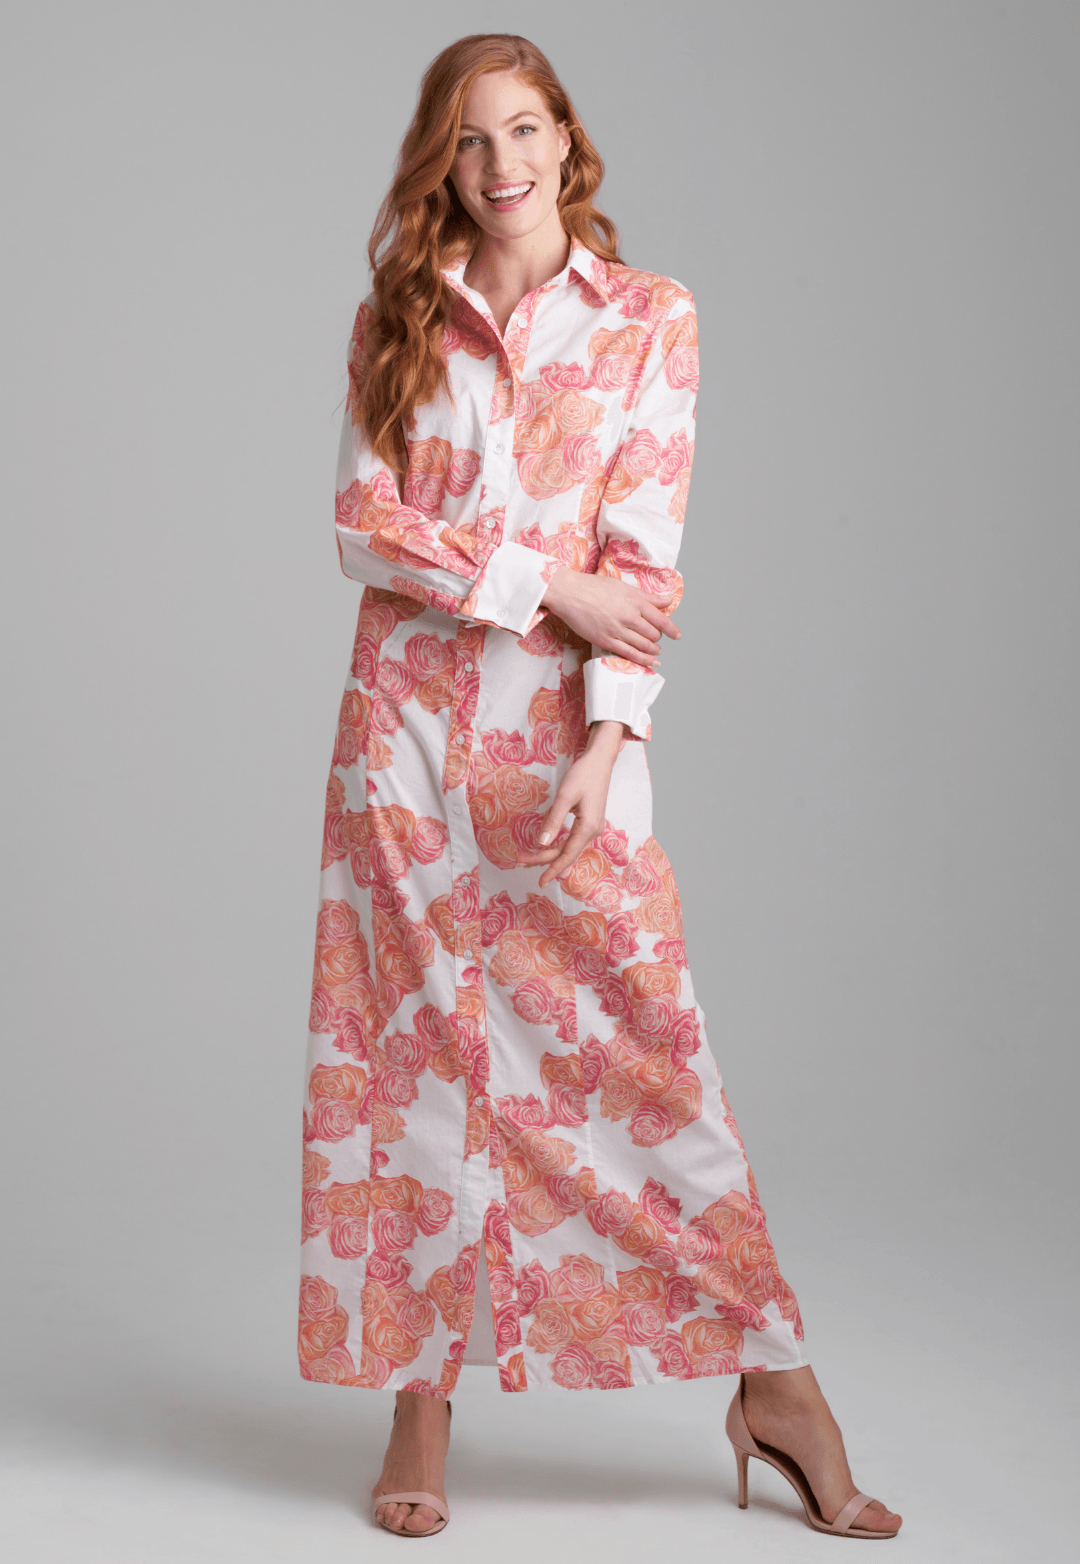 Woman wearing rose printed cotton shirt dress by Ala von Auersperg for spring summer 2022